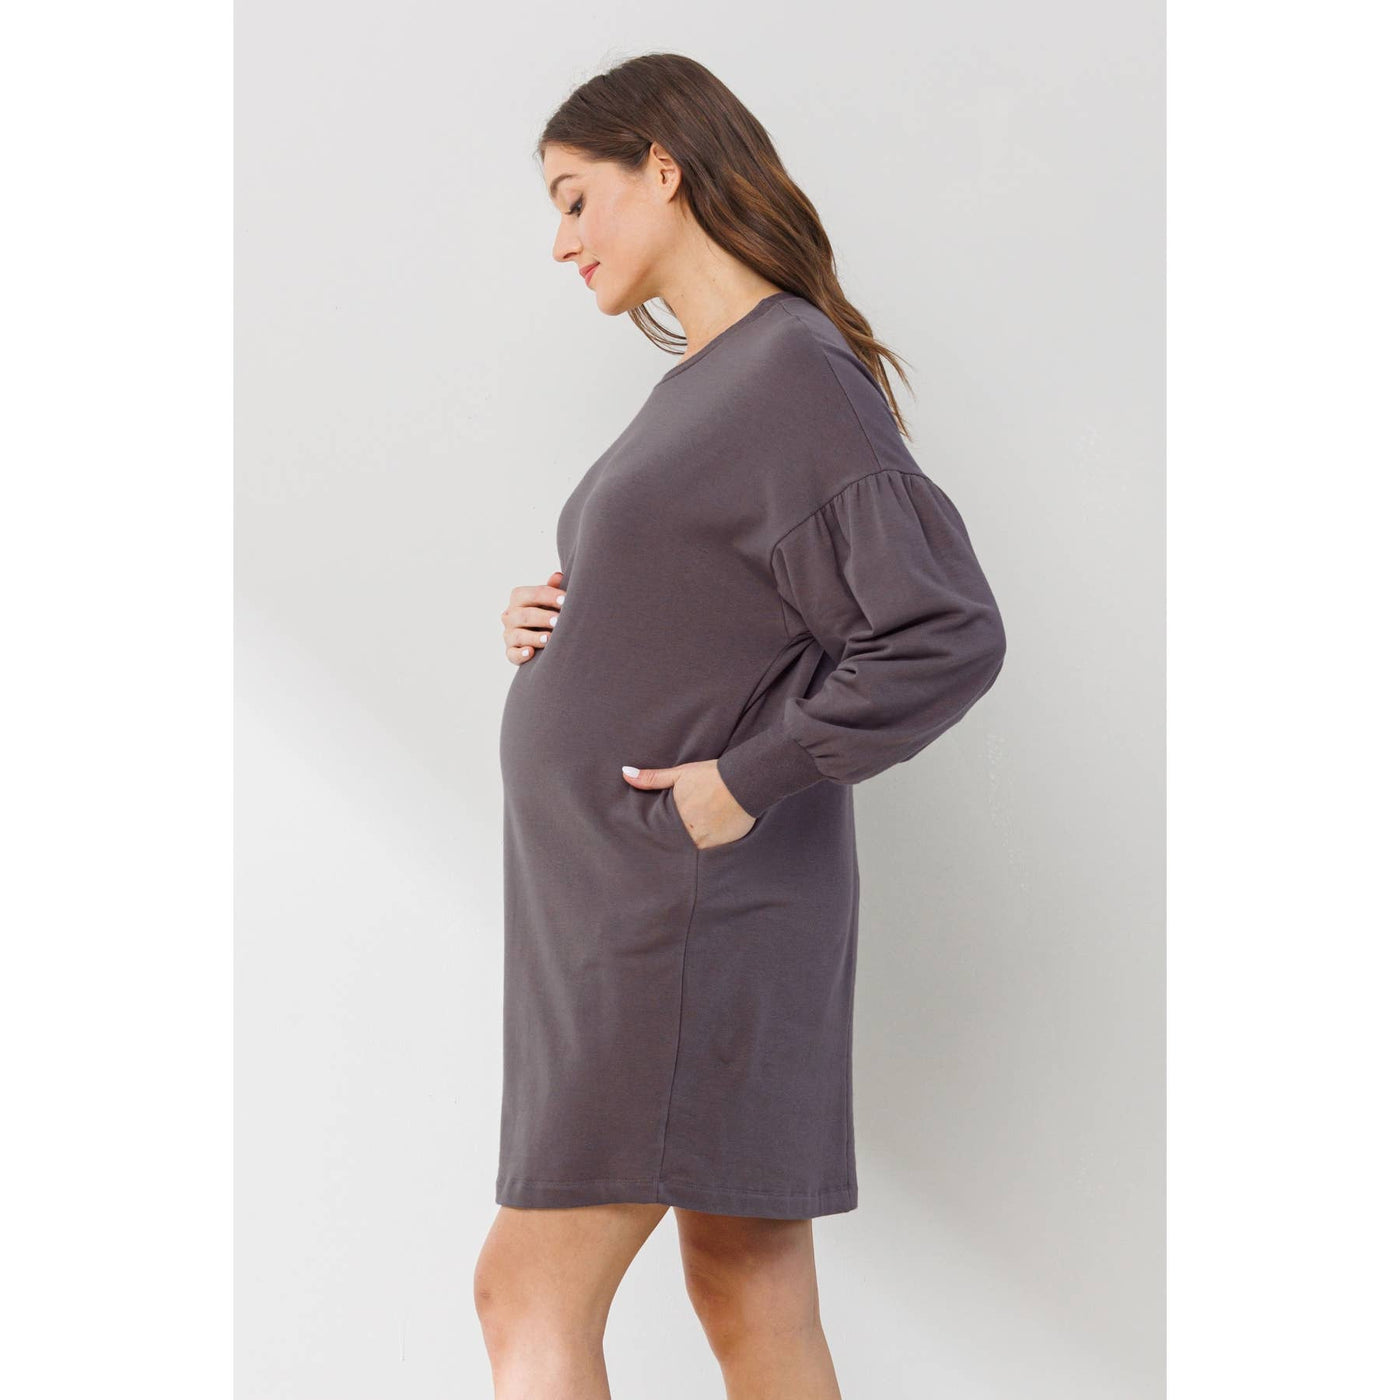 Crew Neck Sweater Dress with Pockets